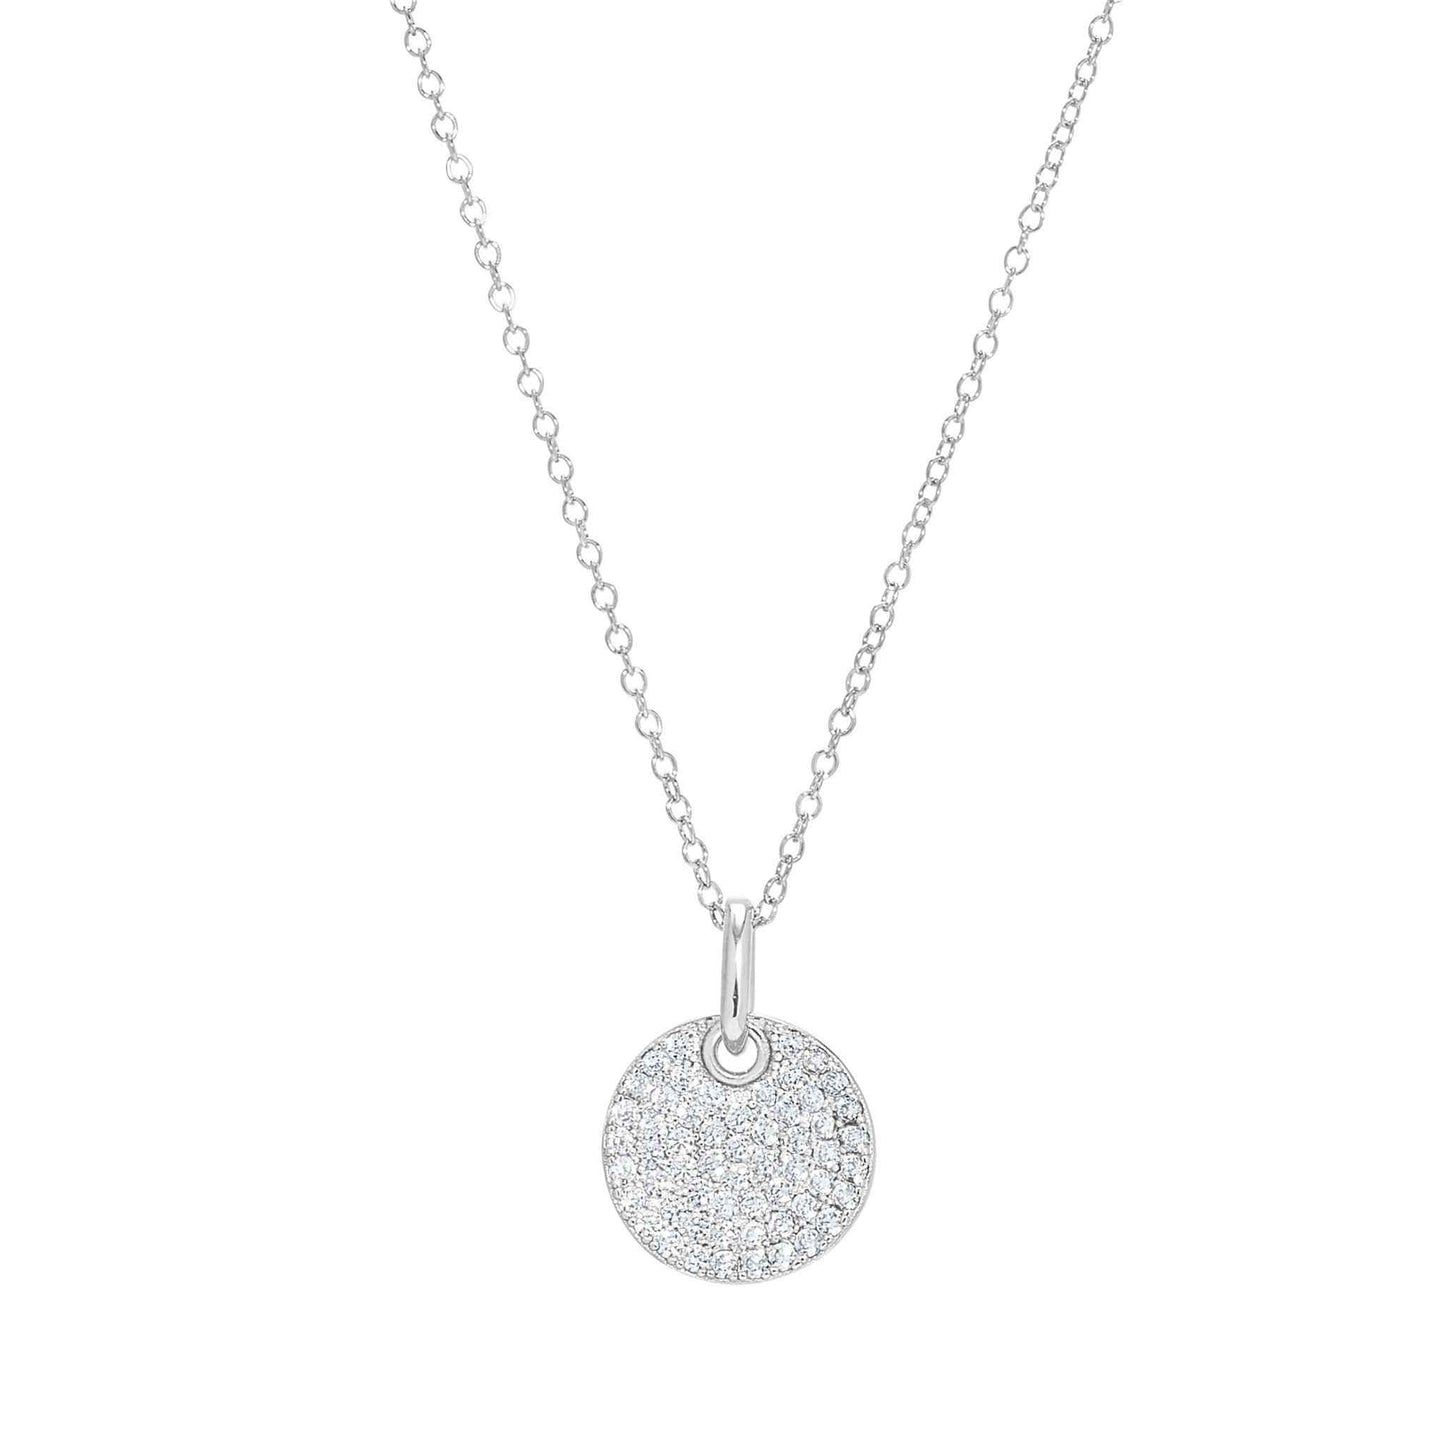 A rose gold and round necklace with simulated diamonds displayed on a neutral white background.